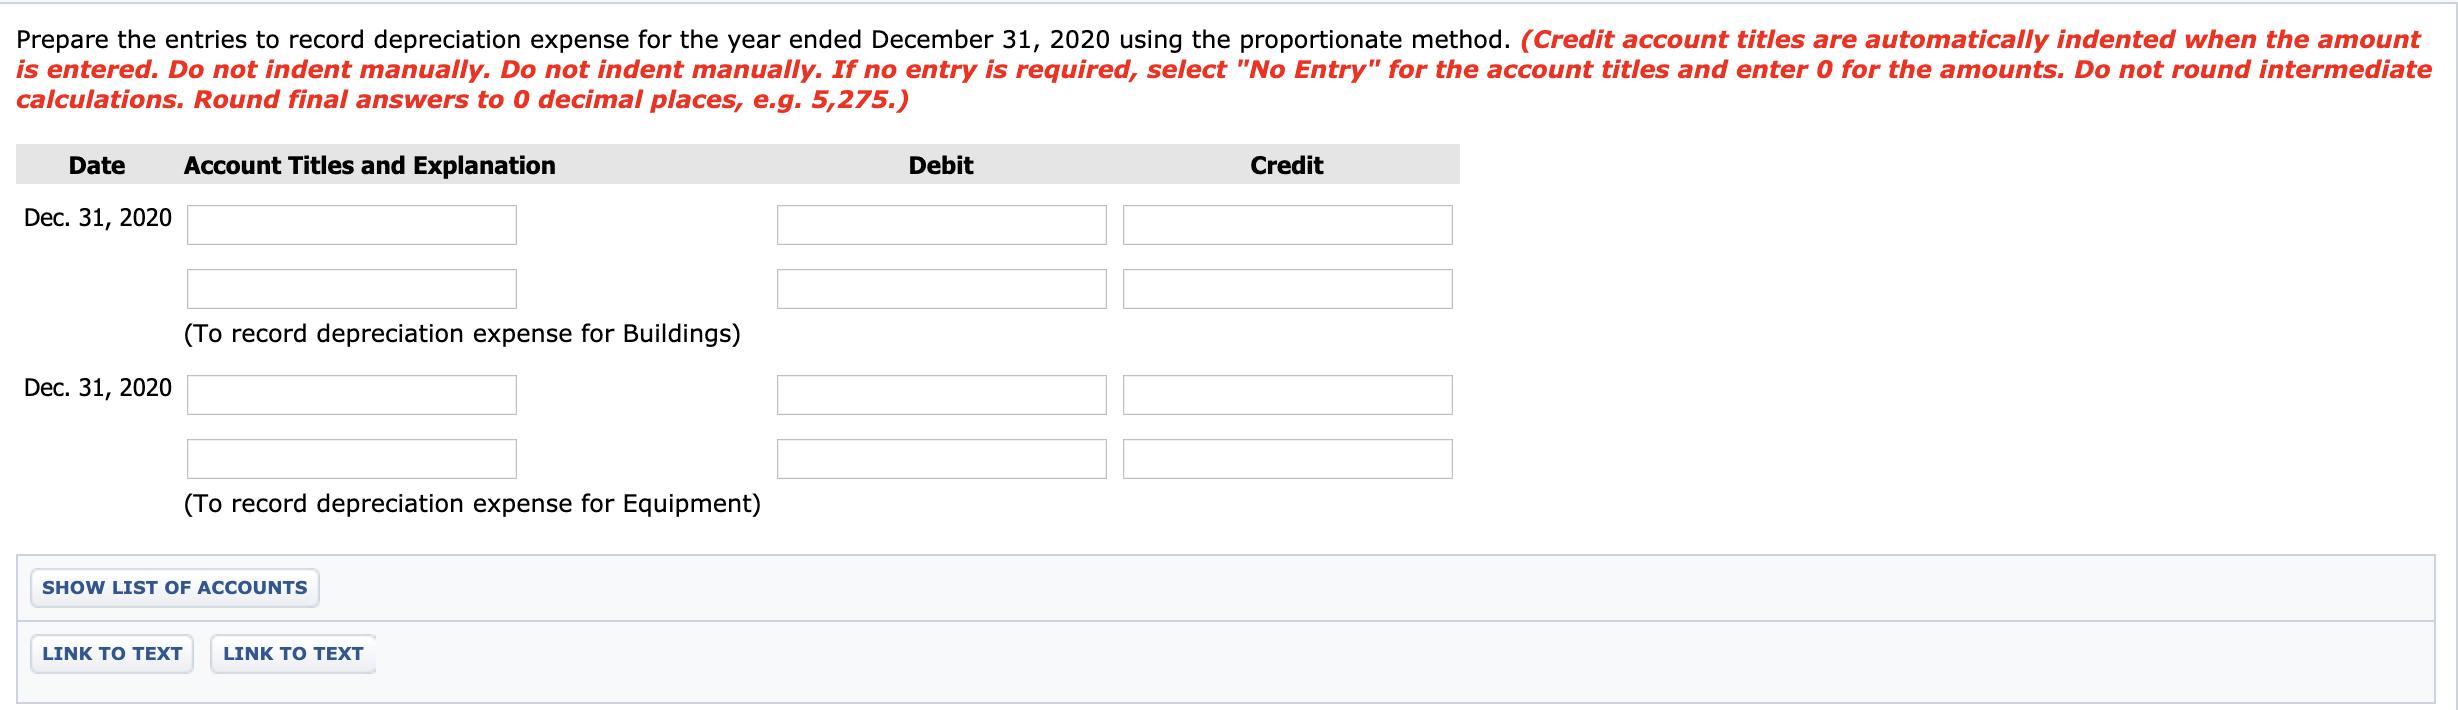 Prepare the entries to record depreciation expense for the year ended December 31, 2020 using the proportionate method. (Cred